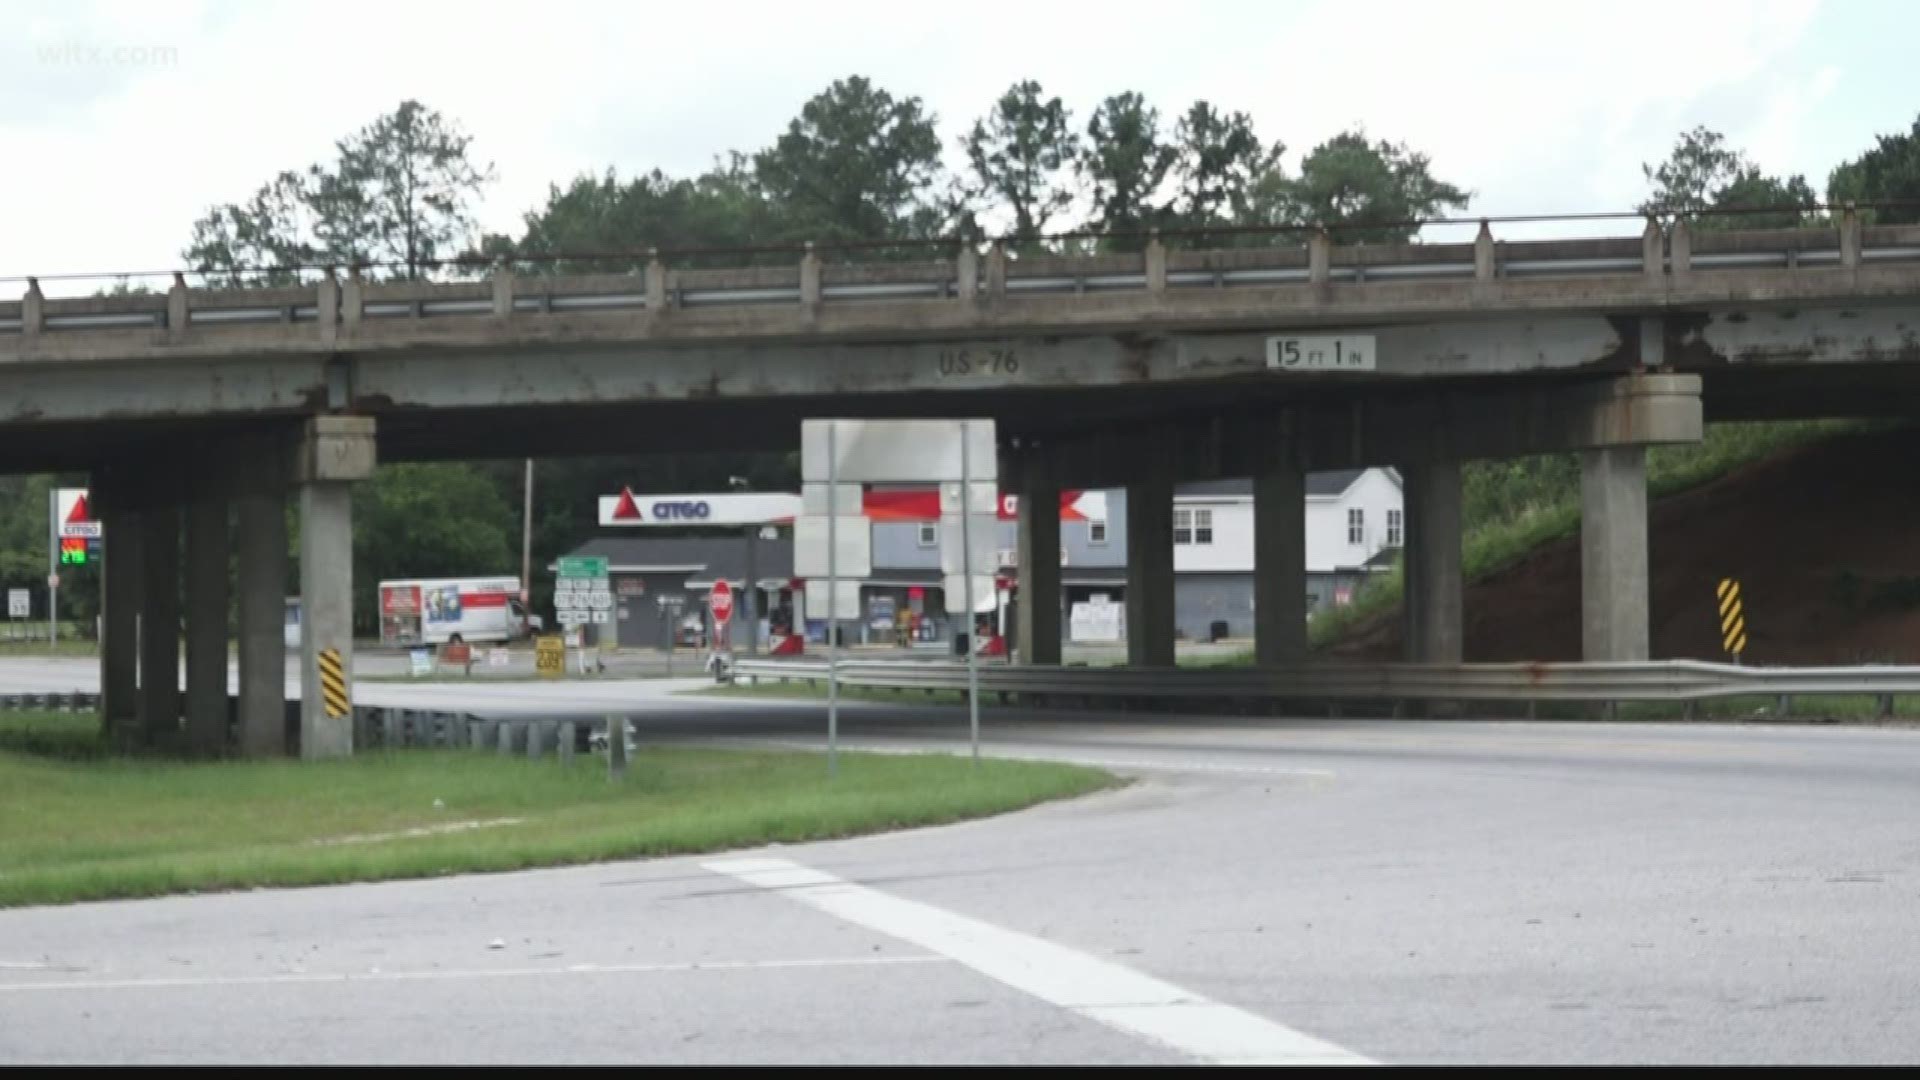 SCDOT plans to replace 465 bridges throughout the state over the next decade. Those bridges are considered "structurally deficient."